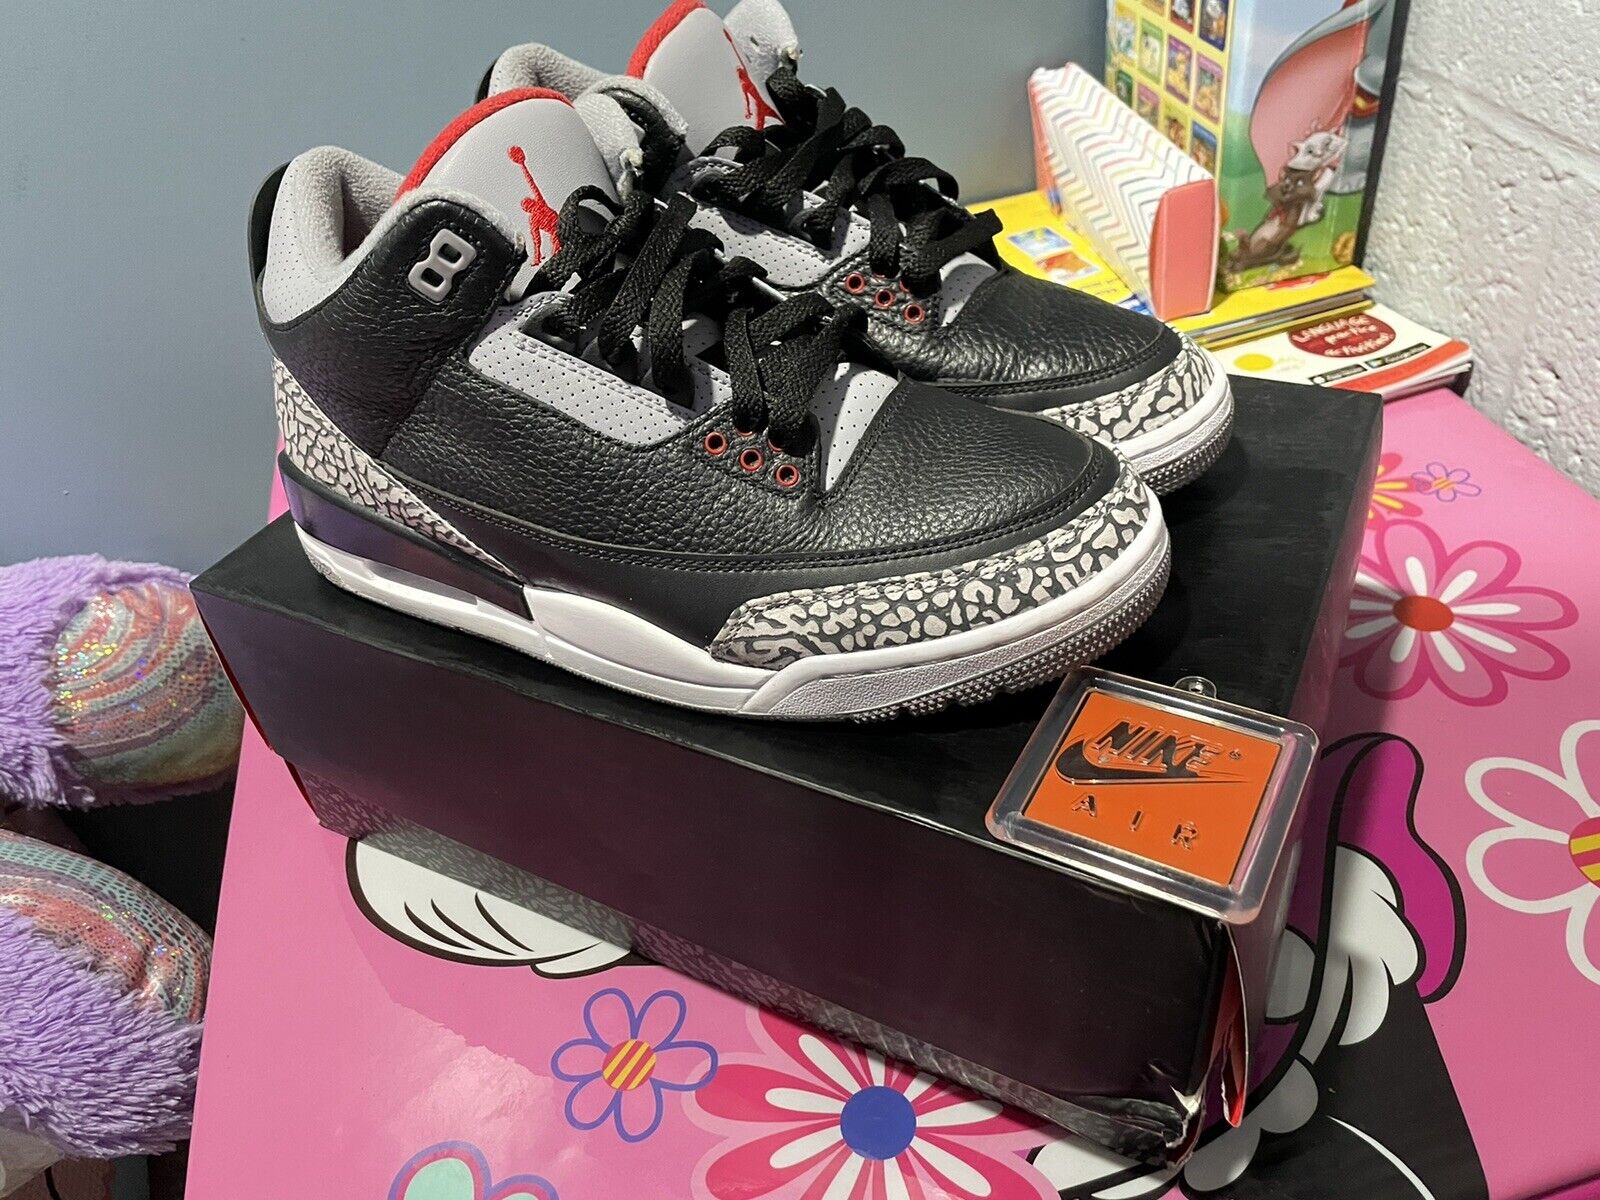 Jordan 3 Black Cement Size 8- Local Pickup Only - image 1